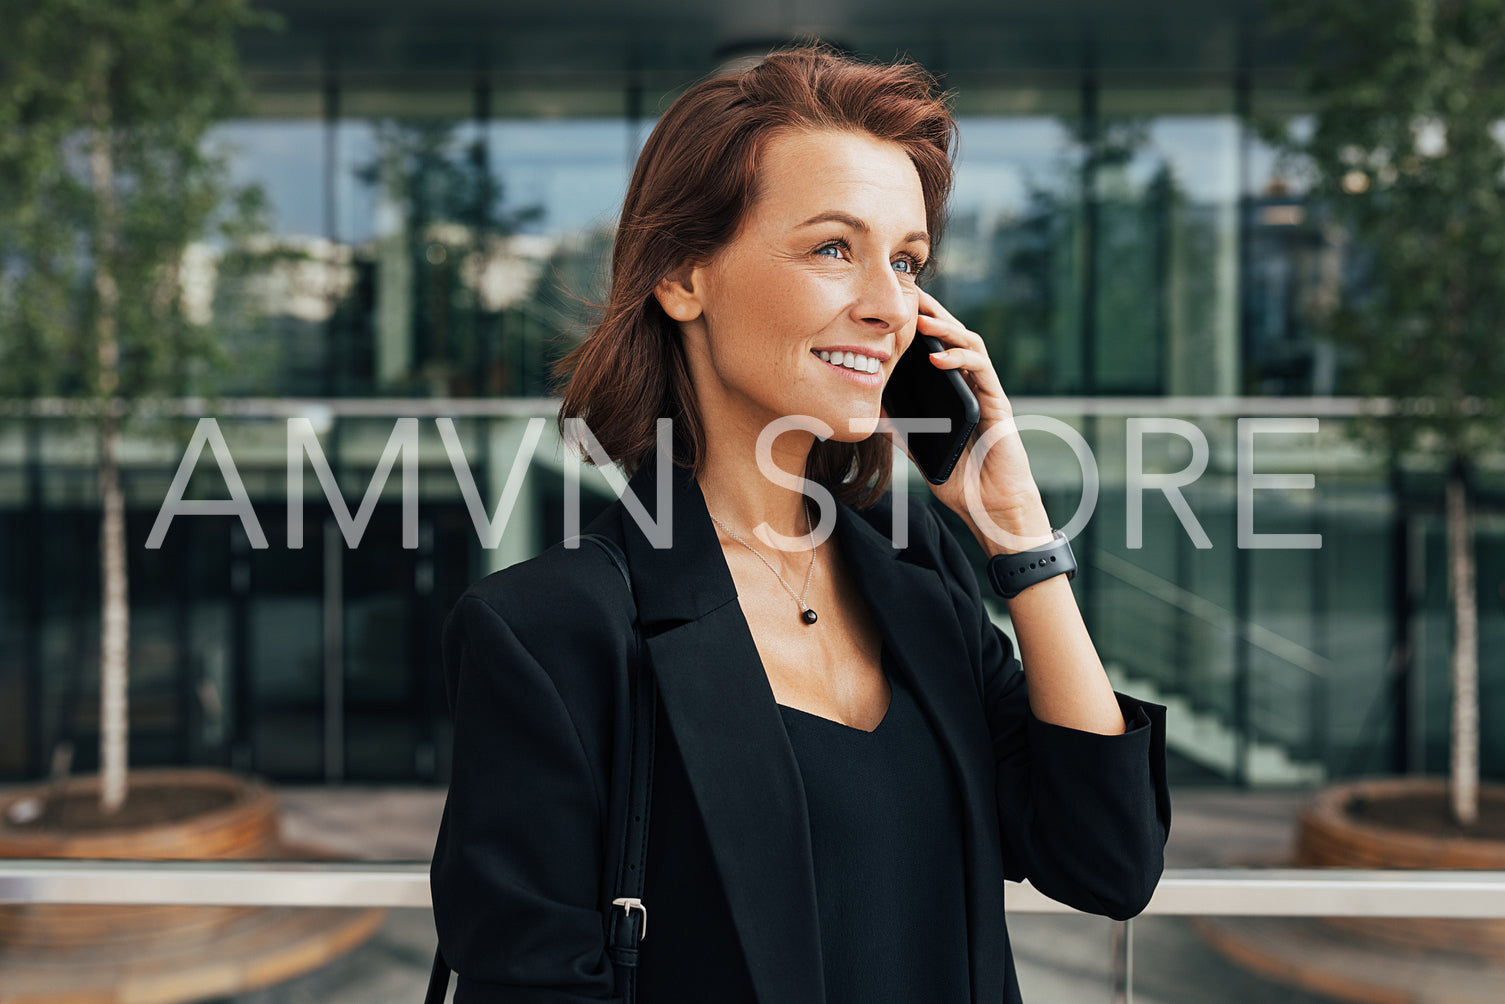 Smiling middle-aged woman talking on mobile phone at business building. Cheerful female with ginger hair in formal clothes standing outdoors and talking on her cell phone.